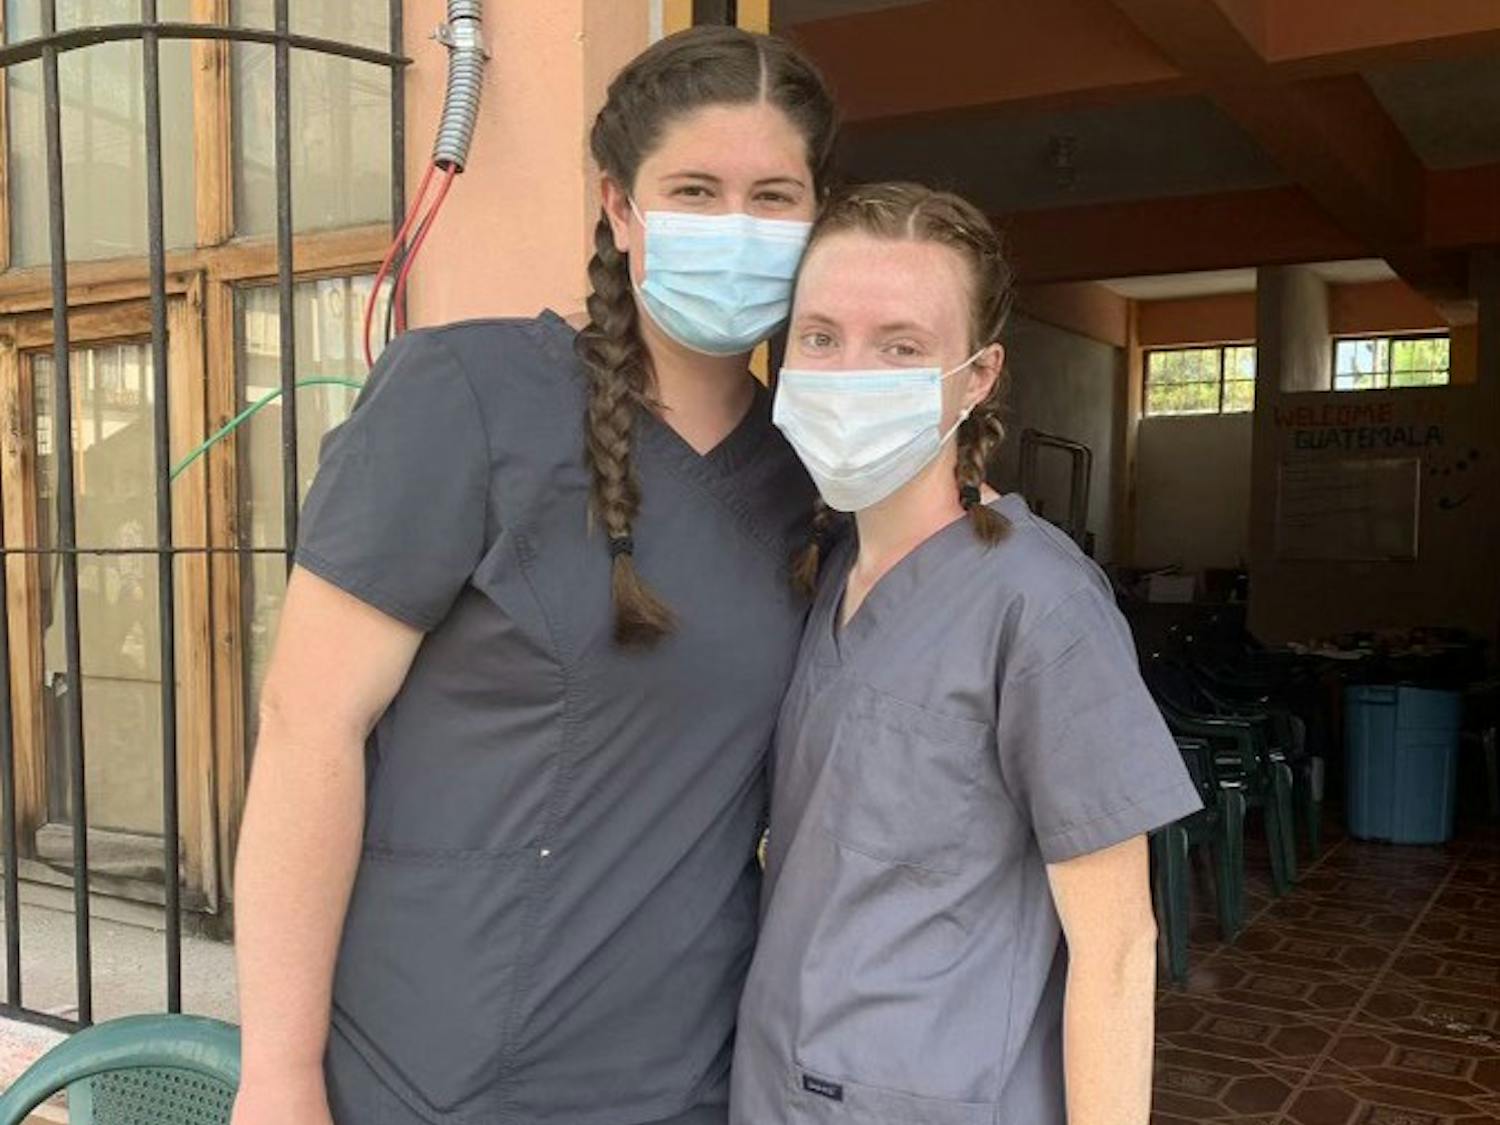 Grace Towery (left) and Moya Shaw (right) pose in Guatemala during their volunteer internship with VAW Global Health Alliances.